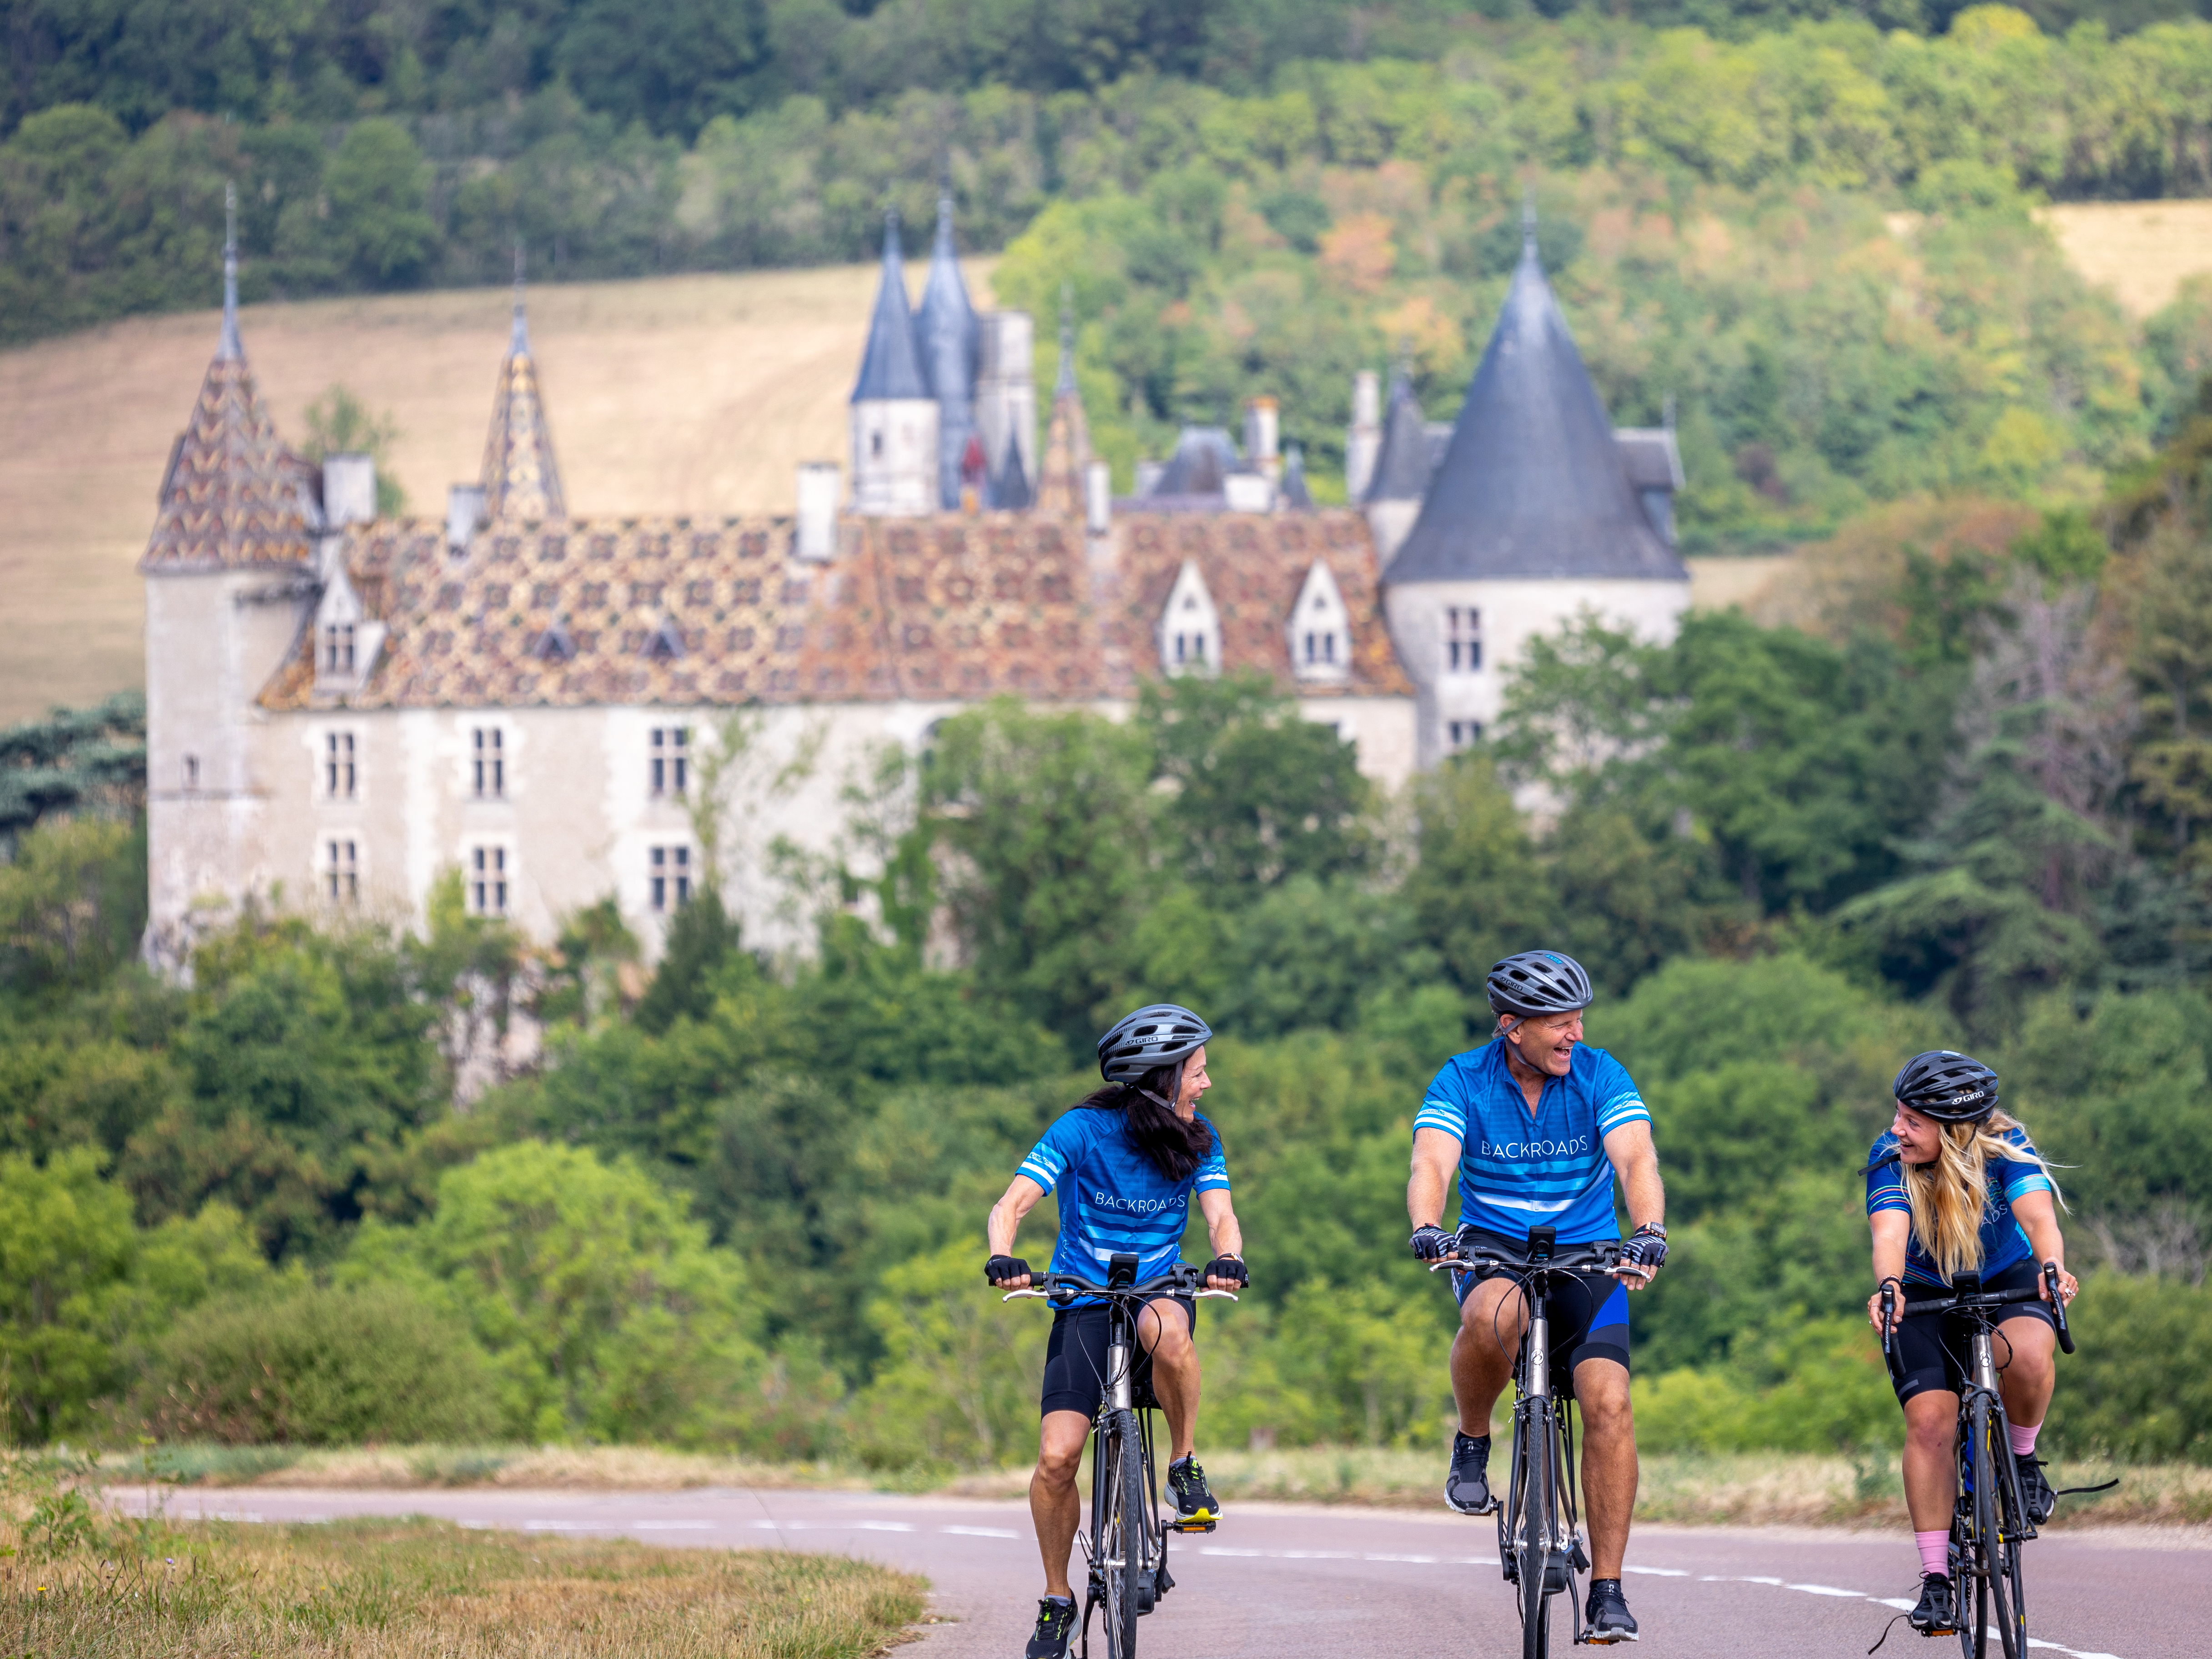 Three bikers riding away from castle in Burgandy, France.